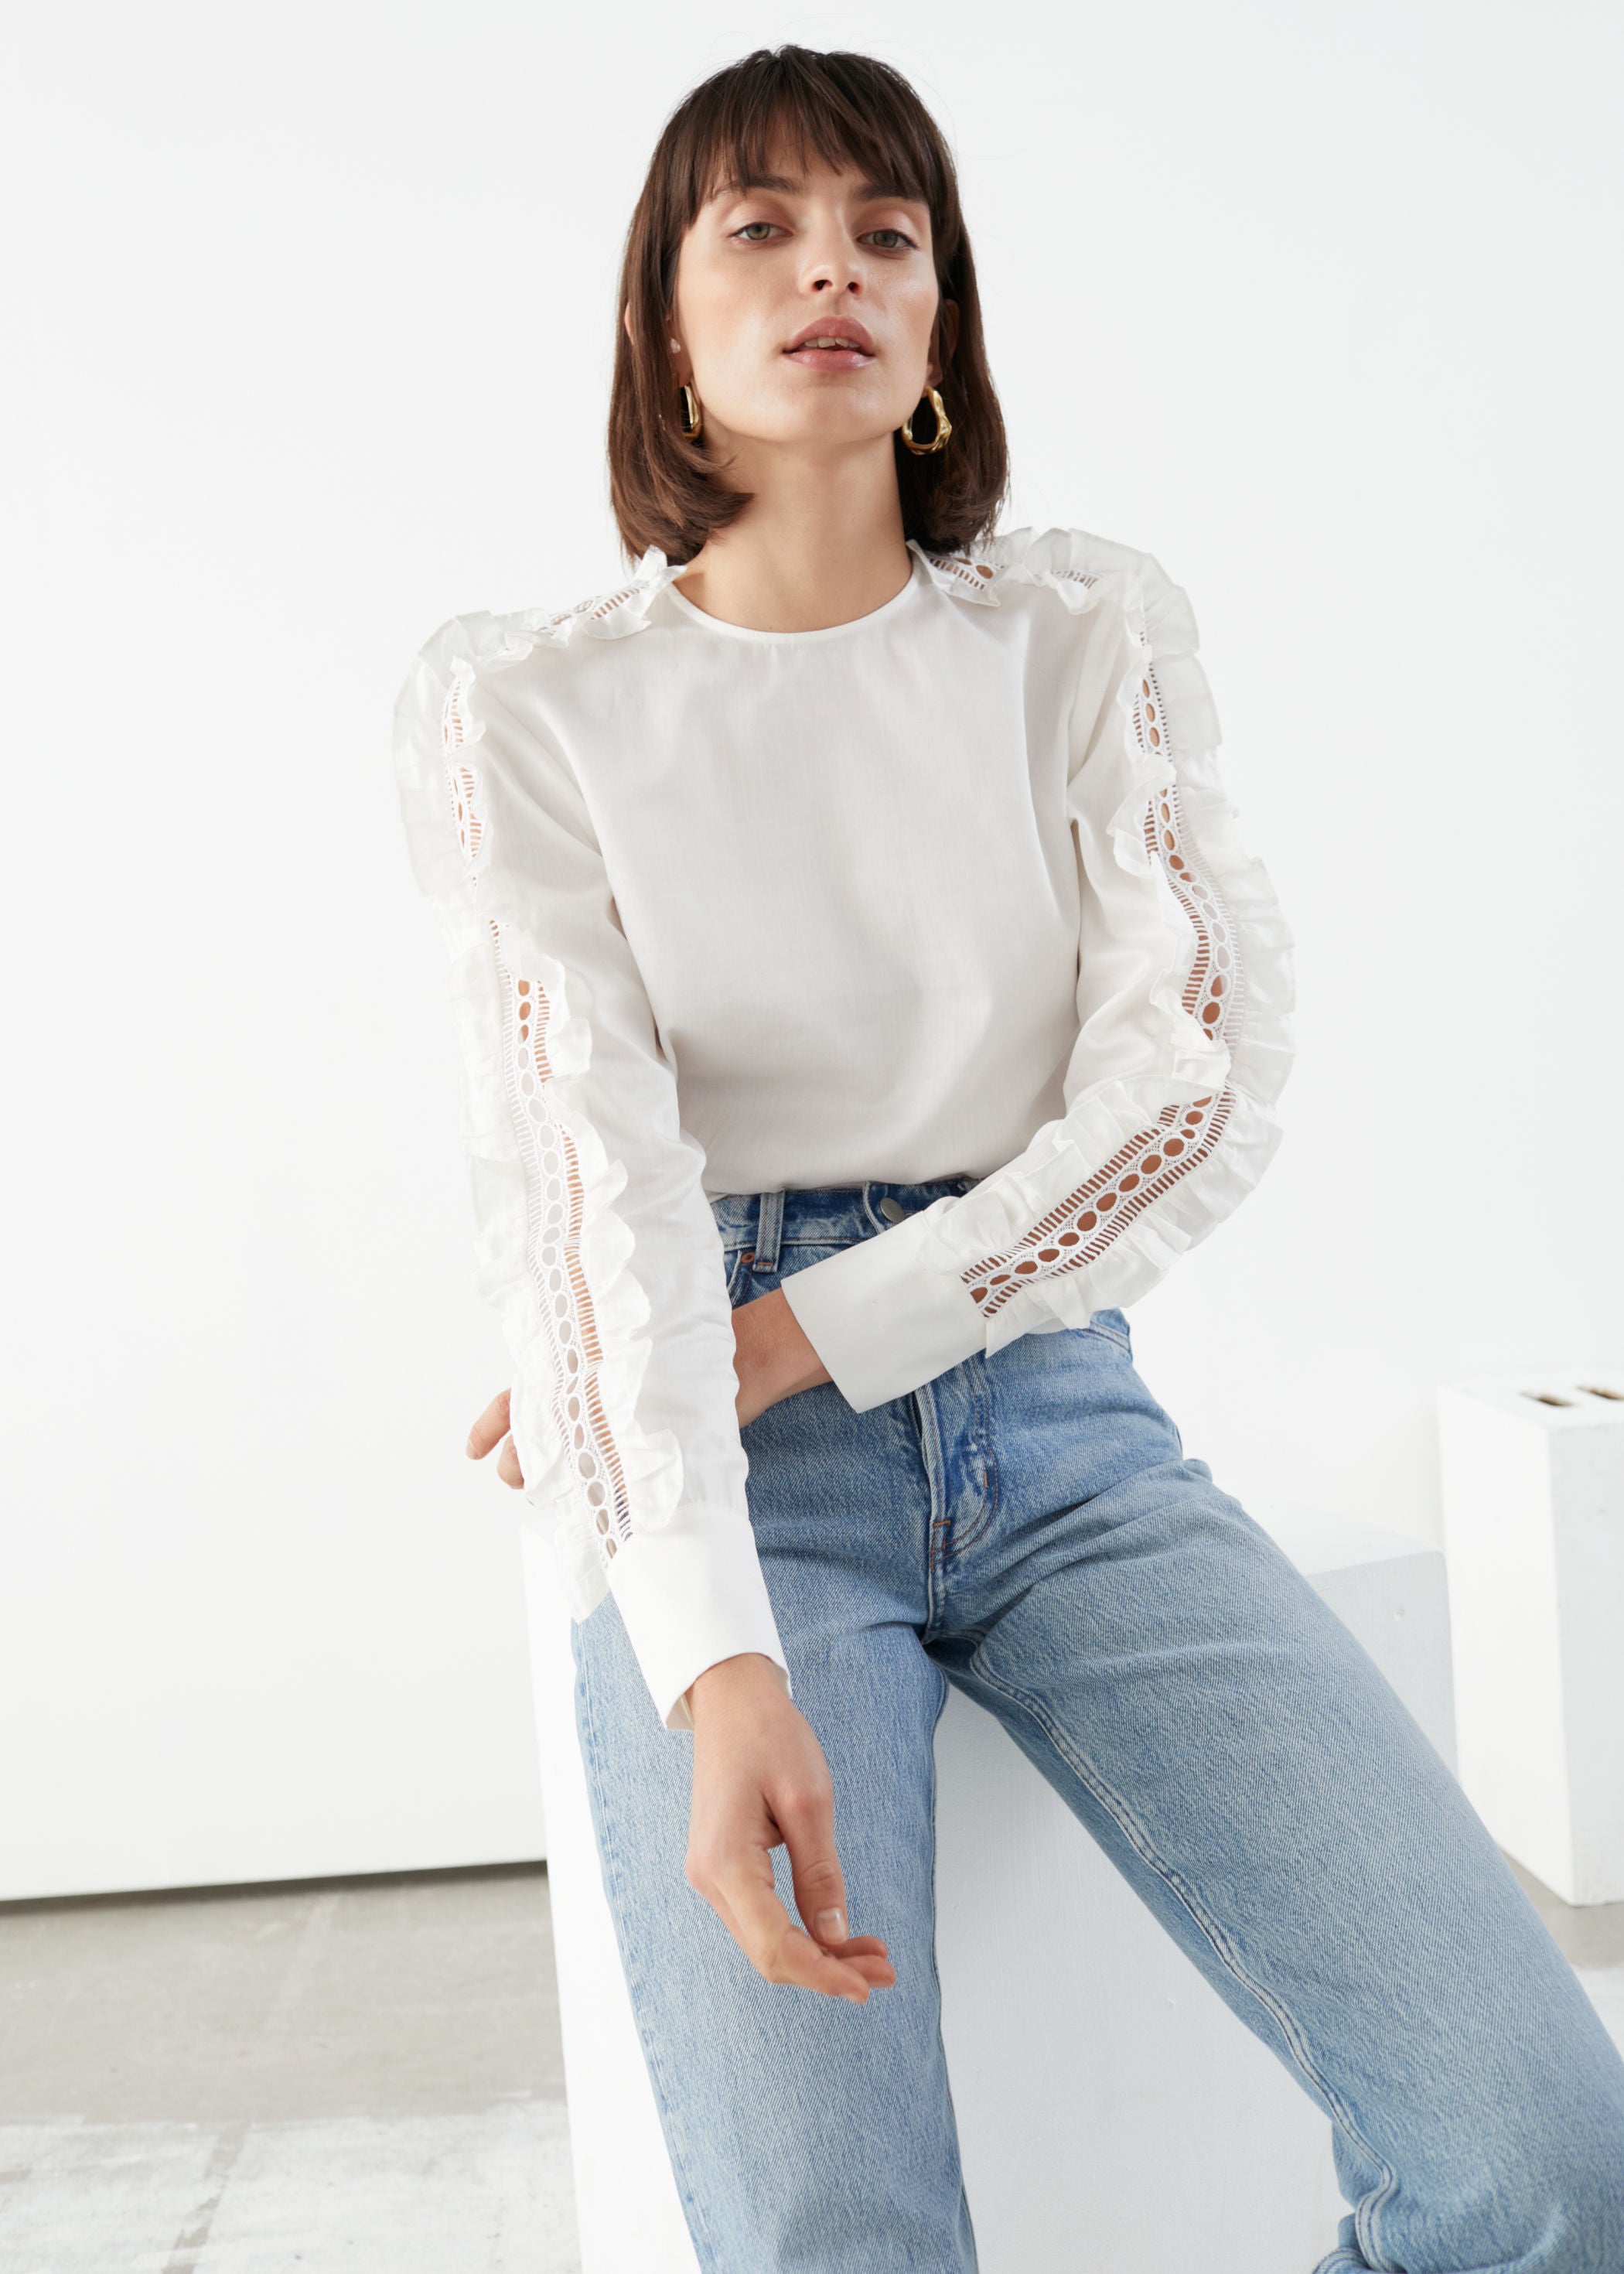 & Other Stories Embroidery Top Mode Tops Longtops 